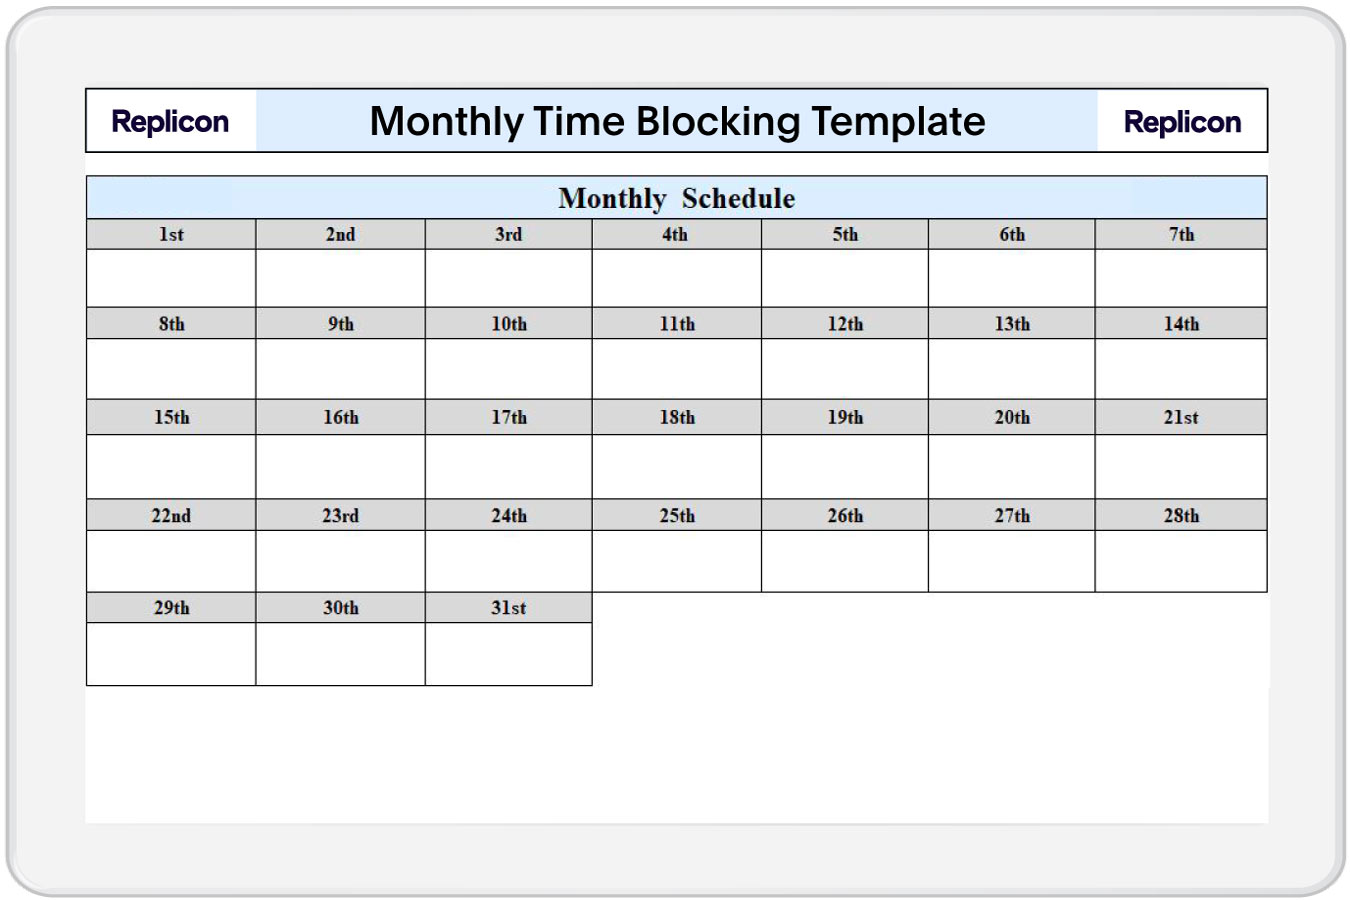 a preview of monthly time blocking template from Replicon